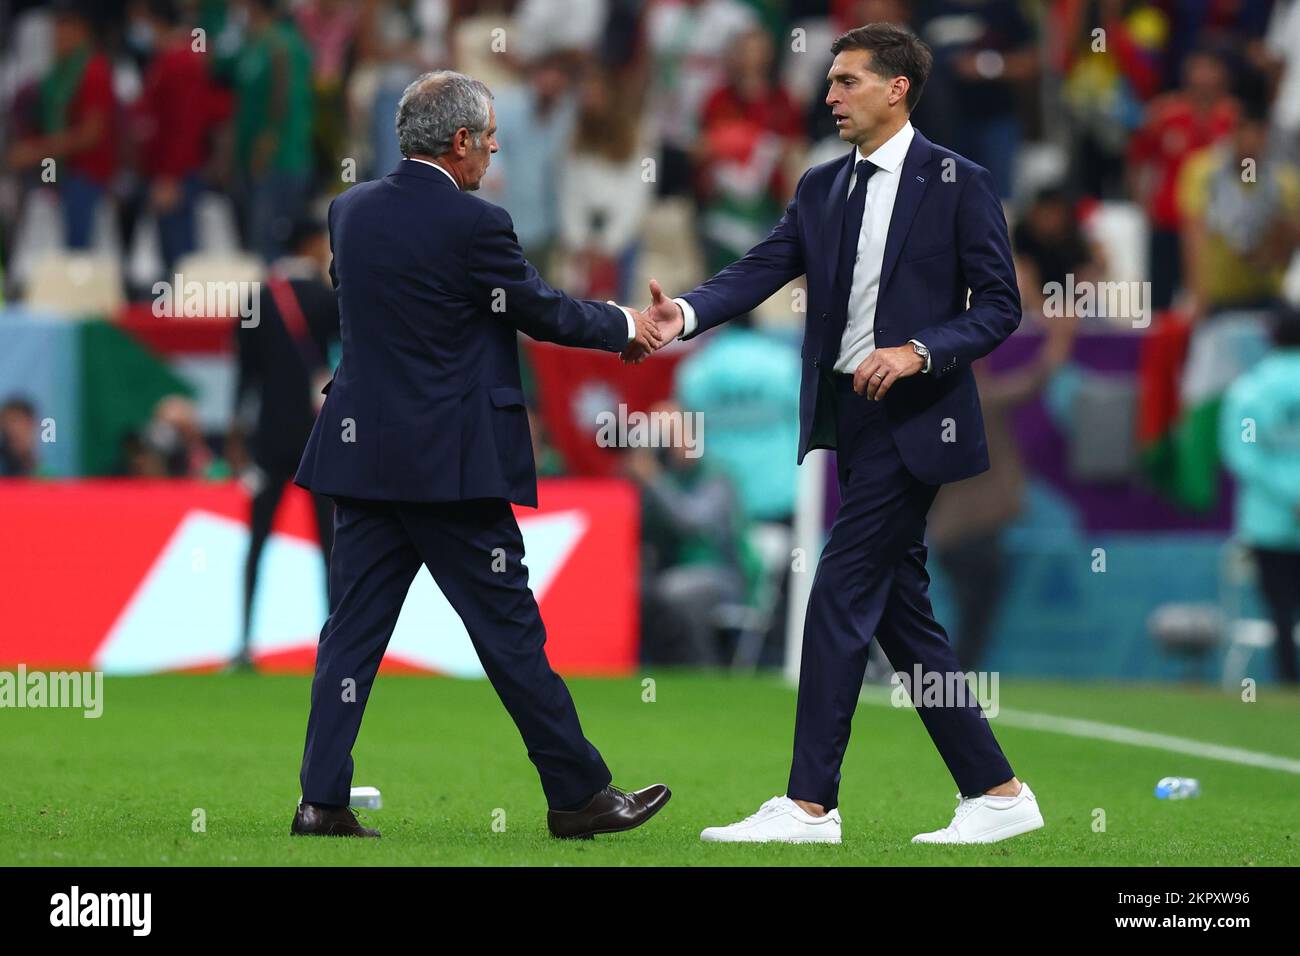 Lusail, Qatar. 28th Nov, 2022. Soccer, World Cup 2022 in Qatar, Portugal - Uruguay, Preliminary Round, Group H, Matchday 2, Lusail Stadium, Portugal's coach Fernando Santos (l) and Uruguay's coach Diego Alonso shake hands after the match. Credit: Tom Weller/dpa/Alamy Live News Stock Photo